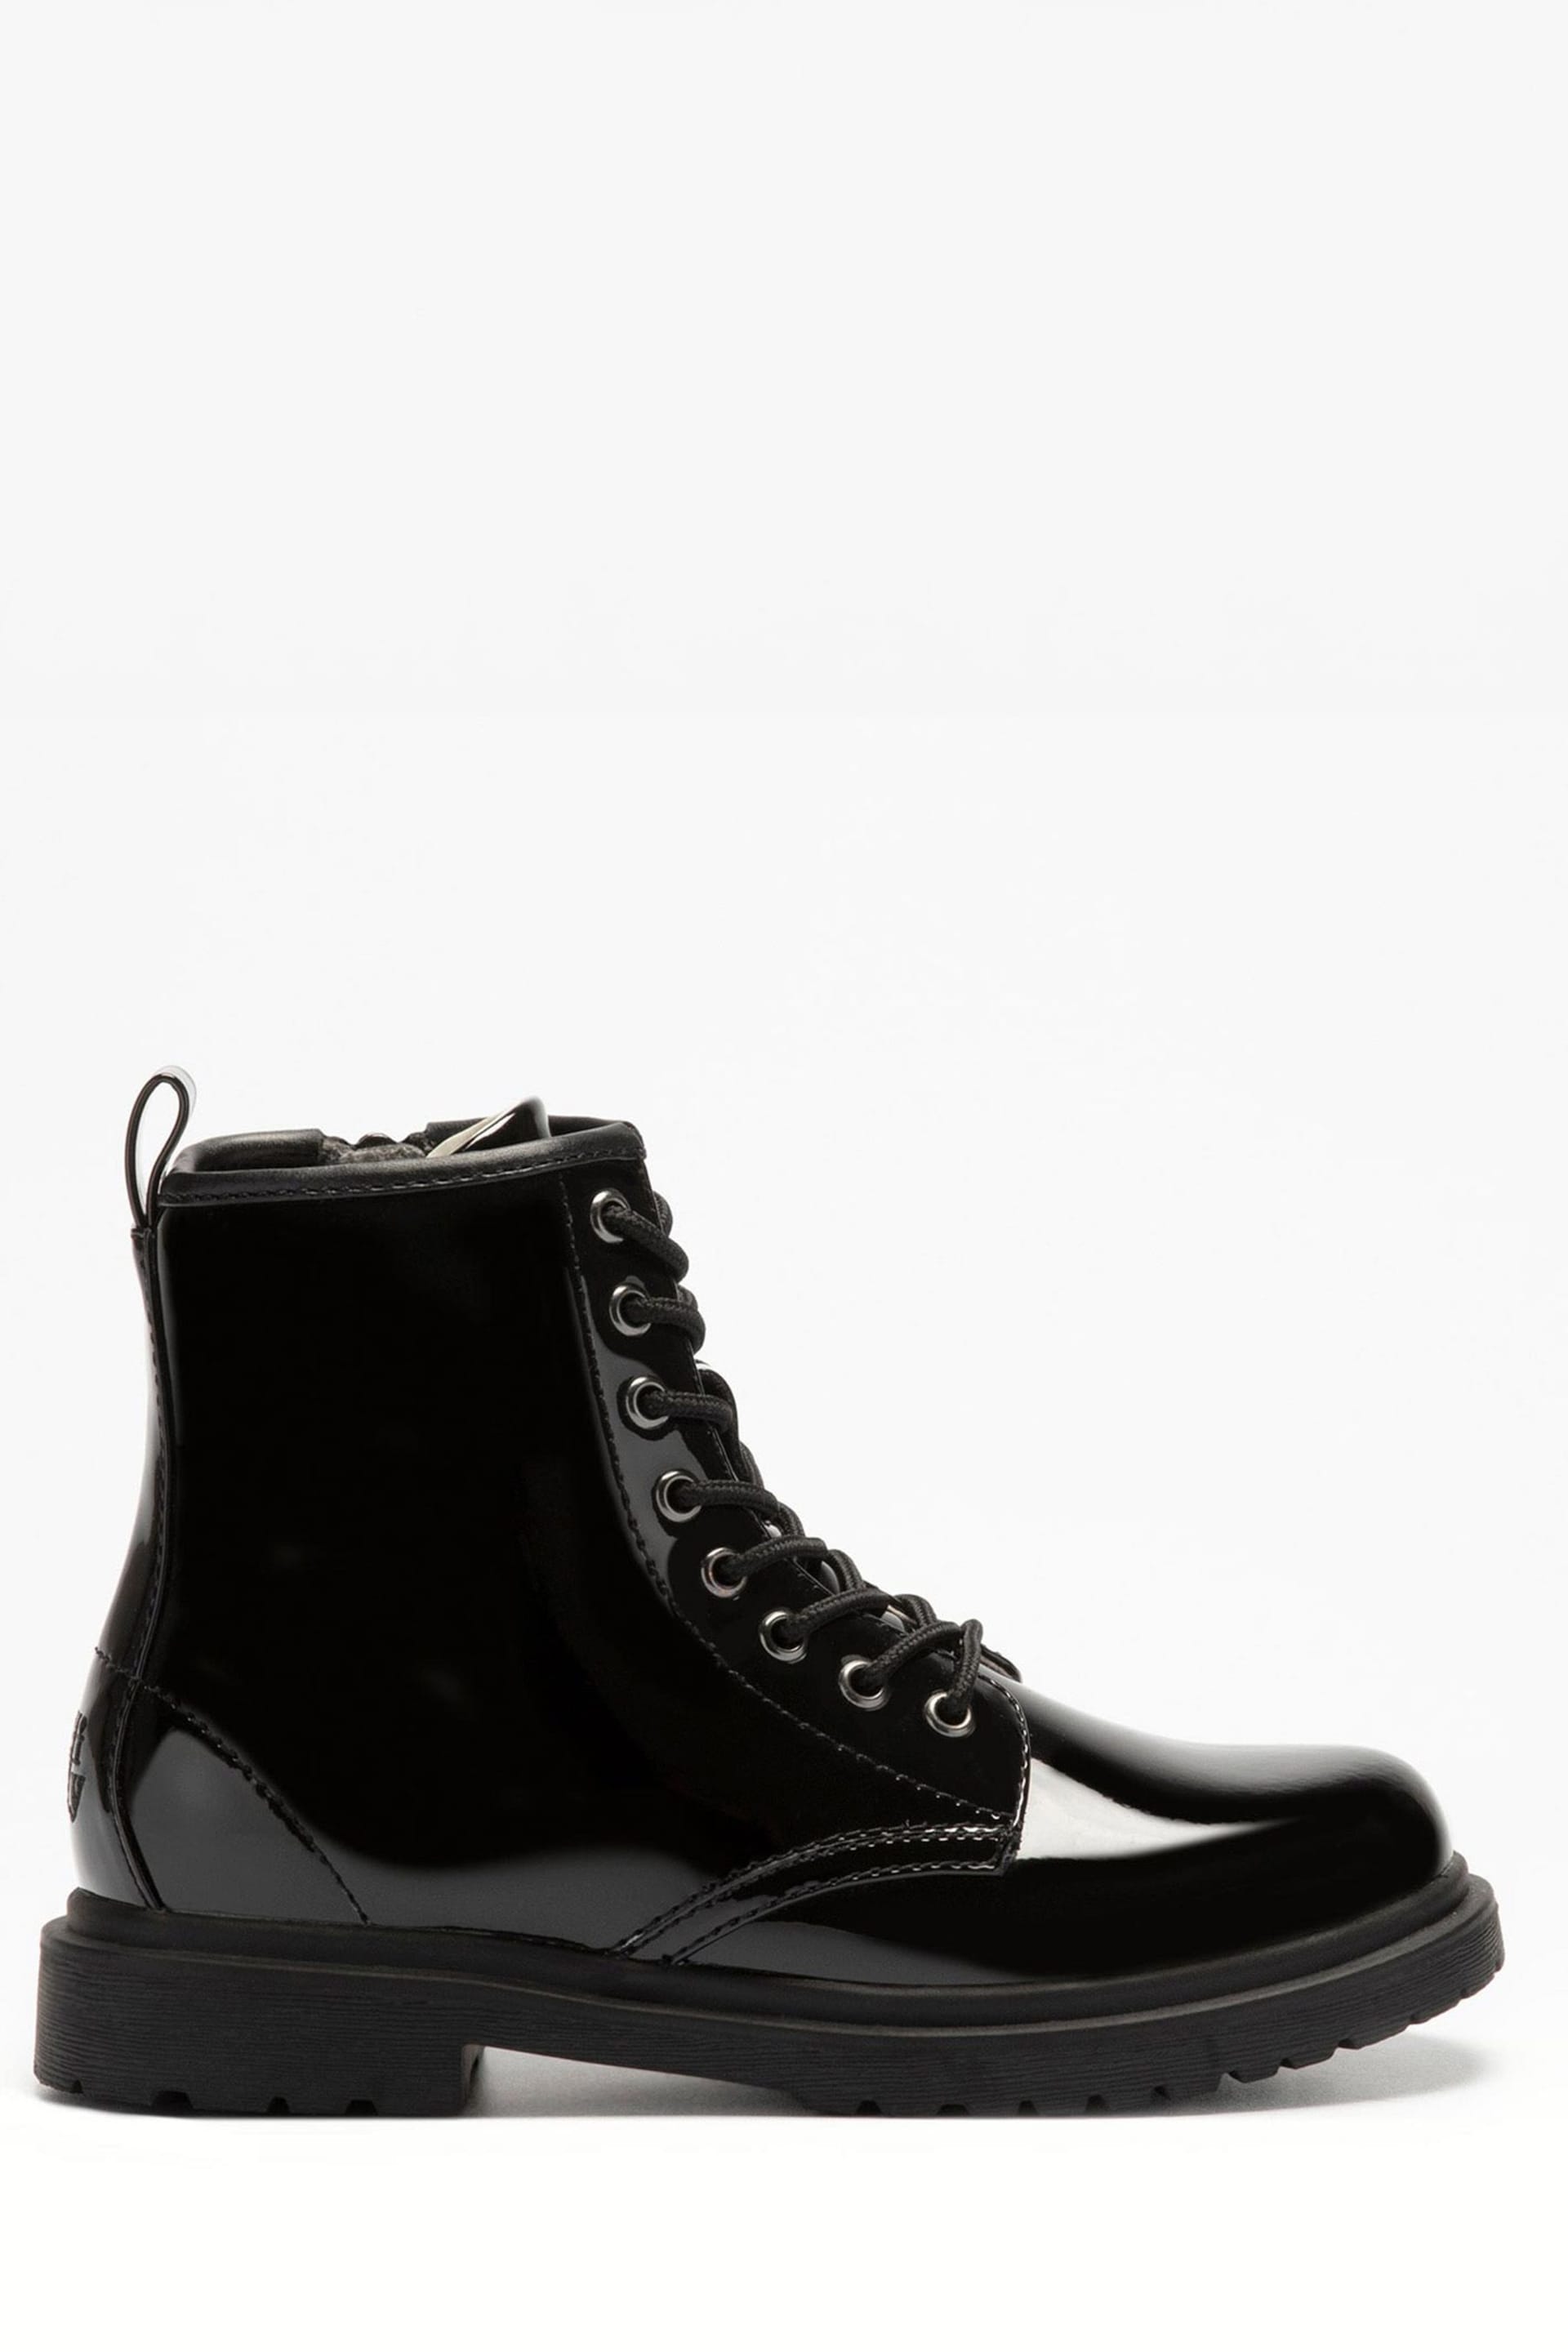 Lelli Kelly Harper Lace Up Black Boots - Image 1 of 4